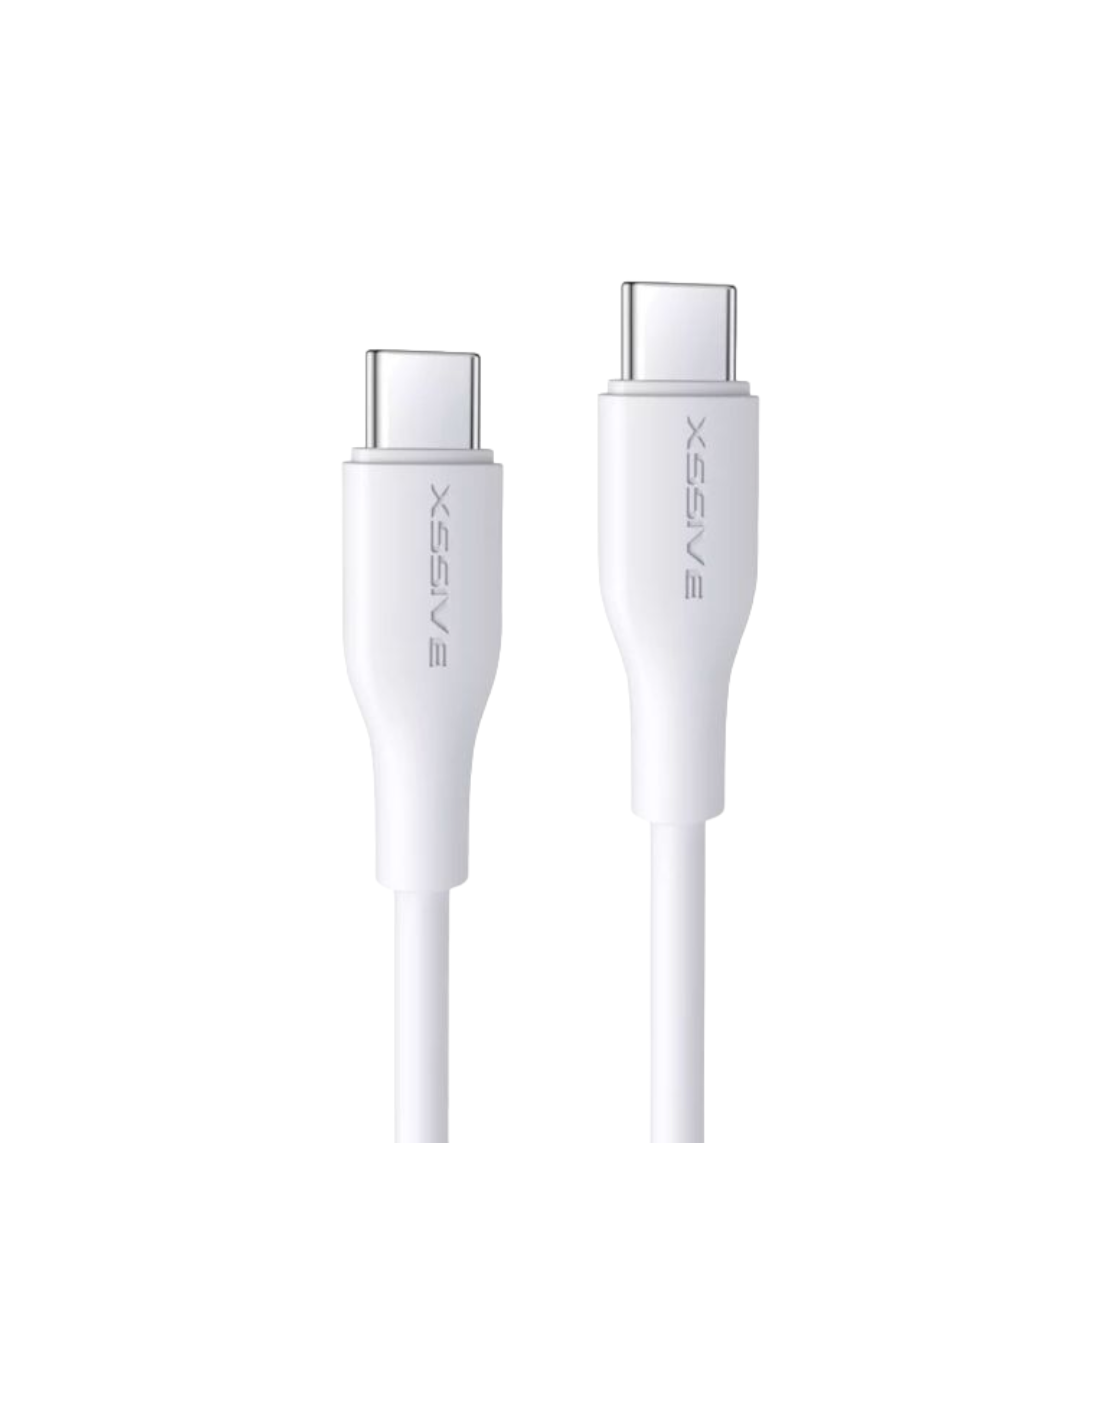 Câble USB Type C Charge Rapide - Chargeur Rapide